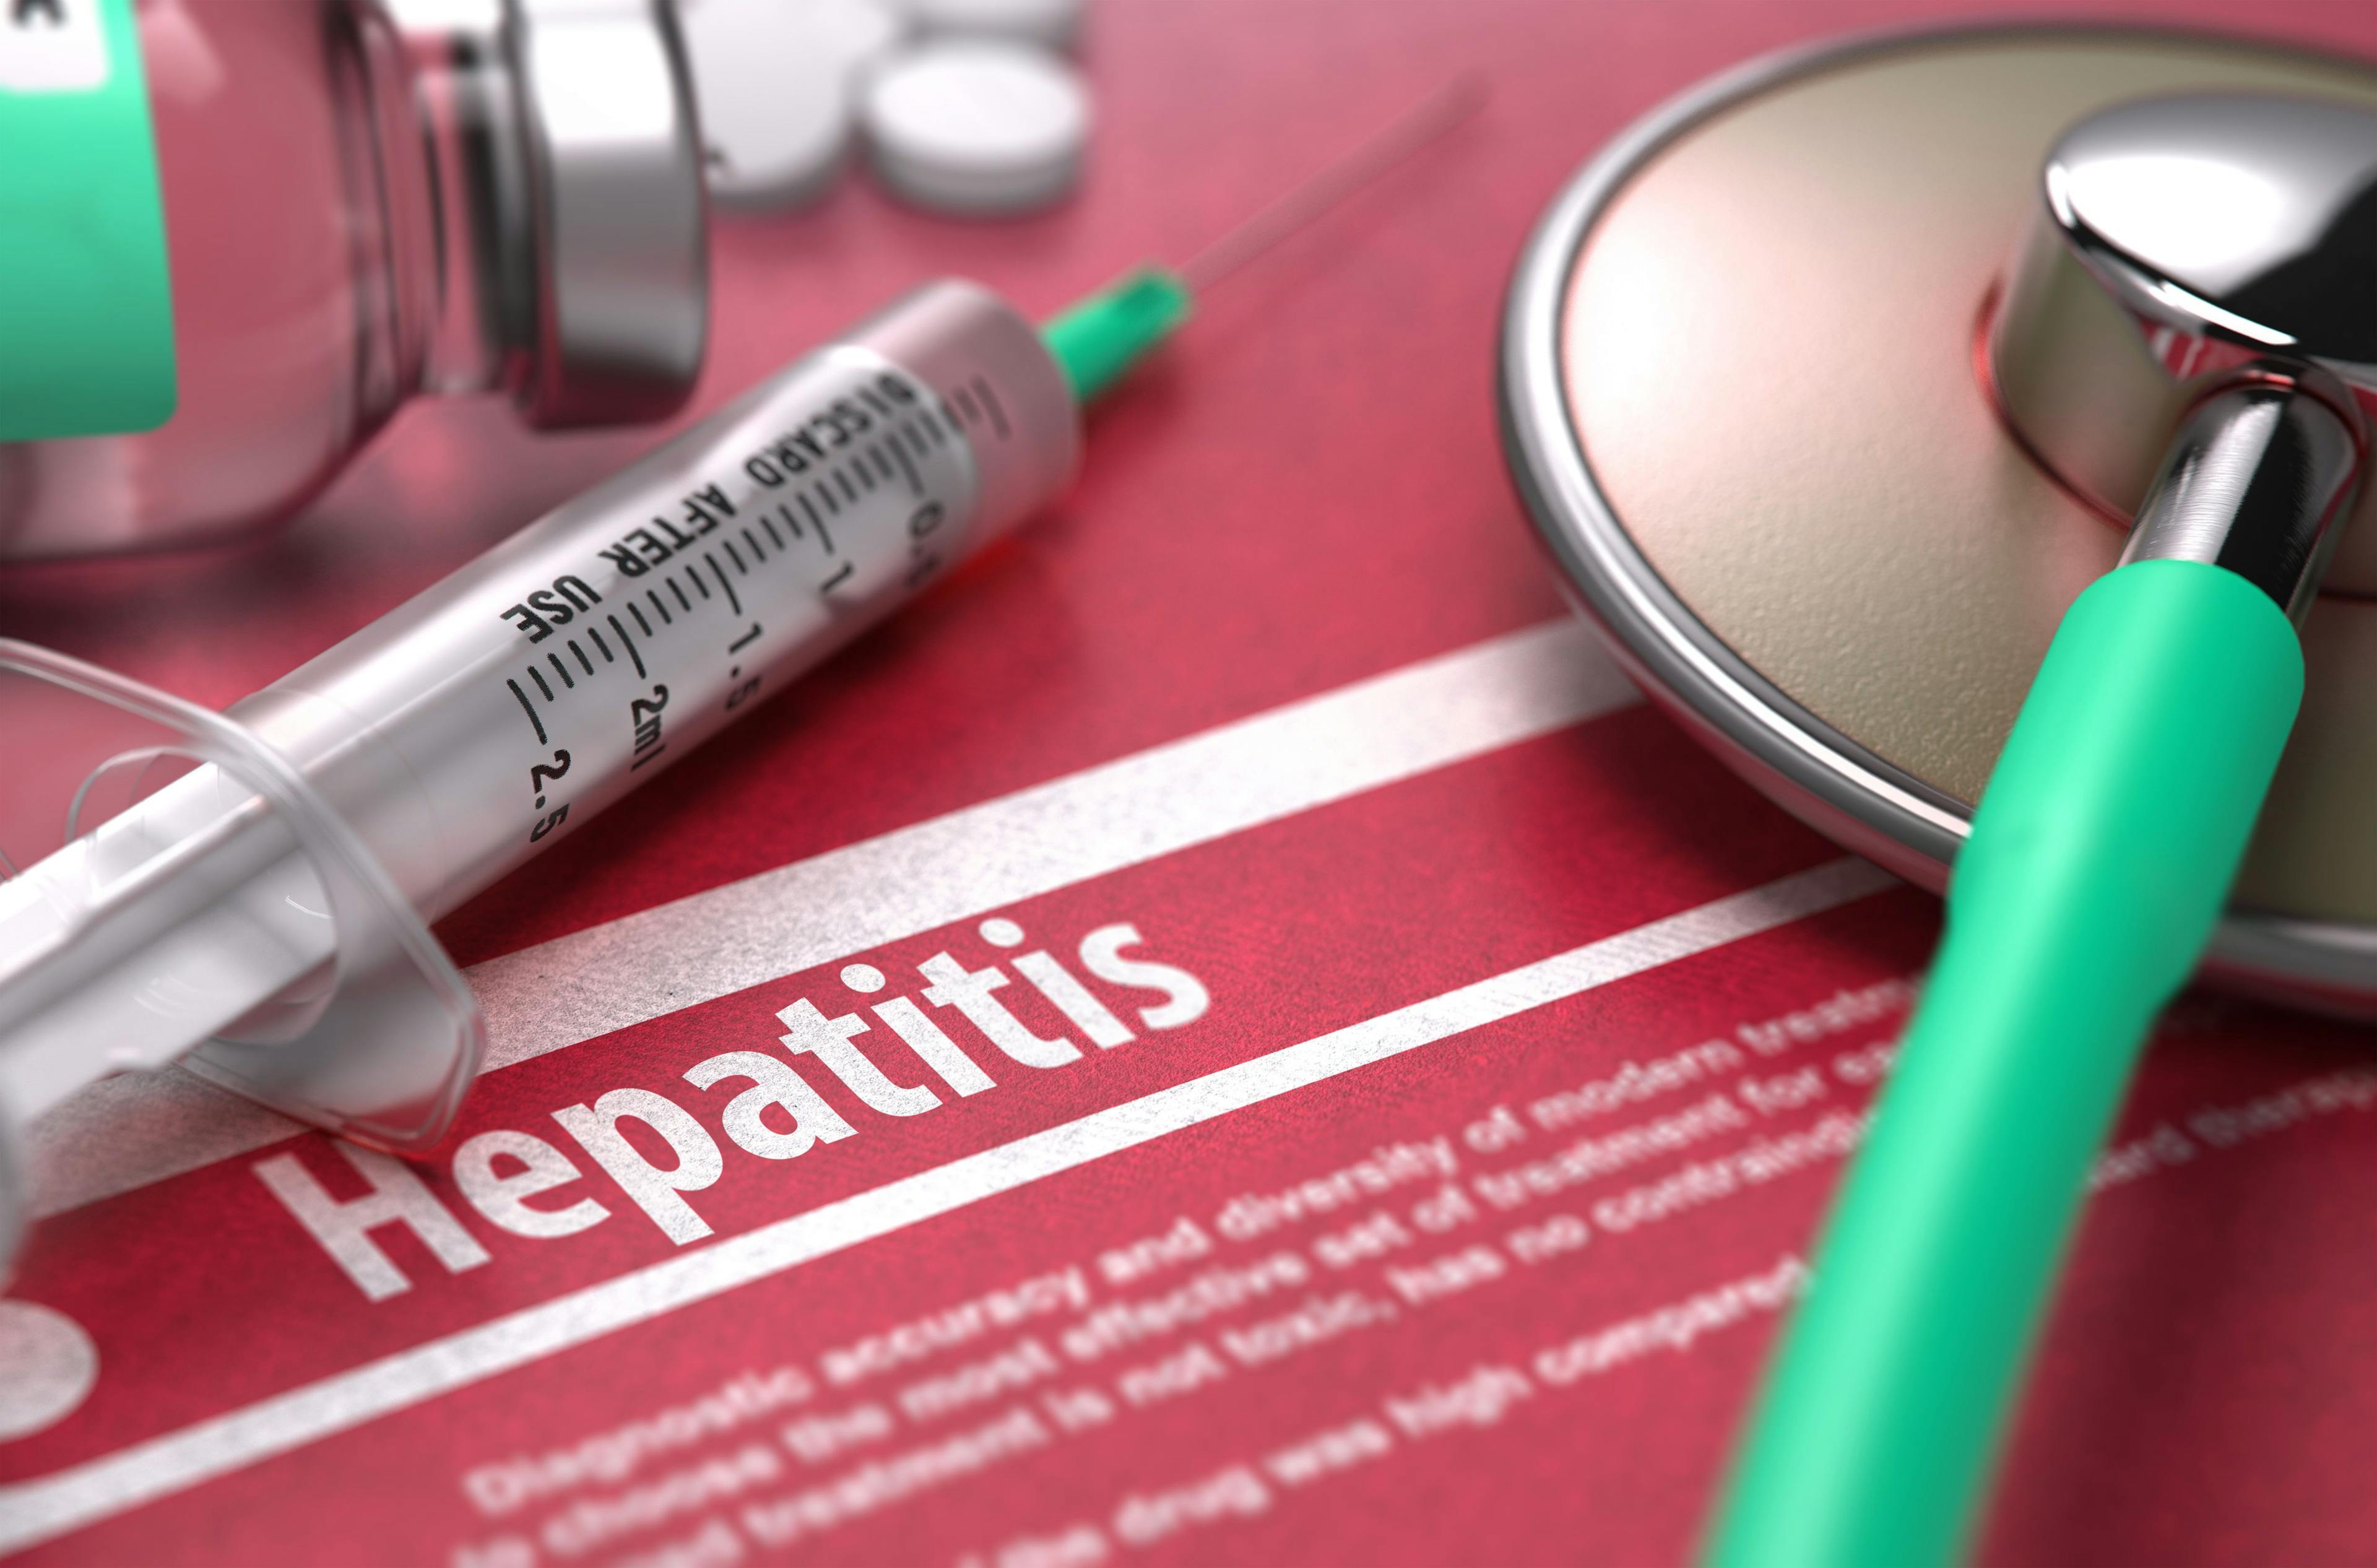  Chronic Hepatitis B Patients in Africa Need Improved Diagnostic Tools, Study Results Show